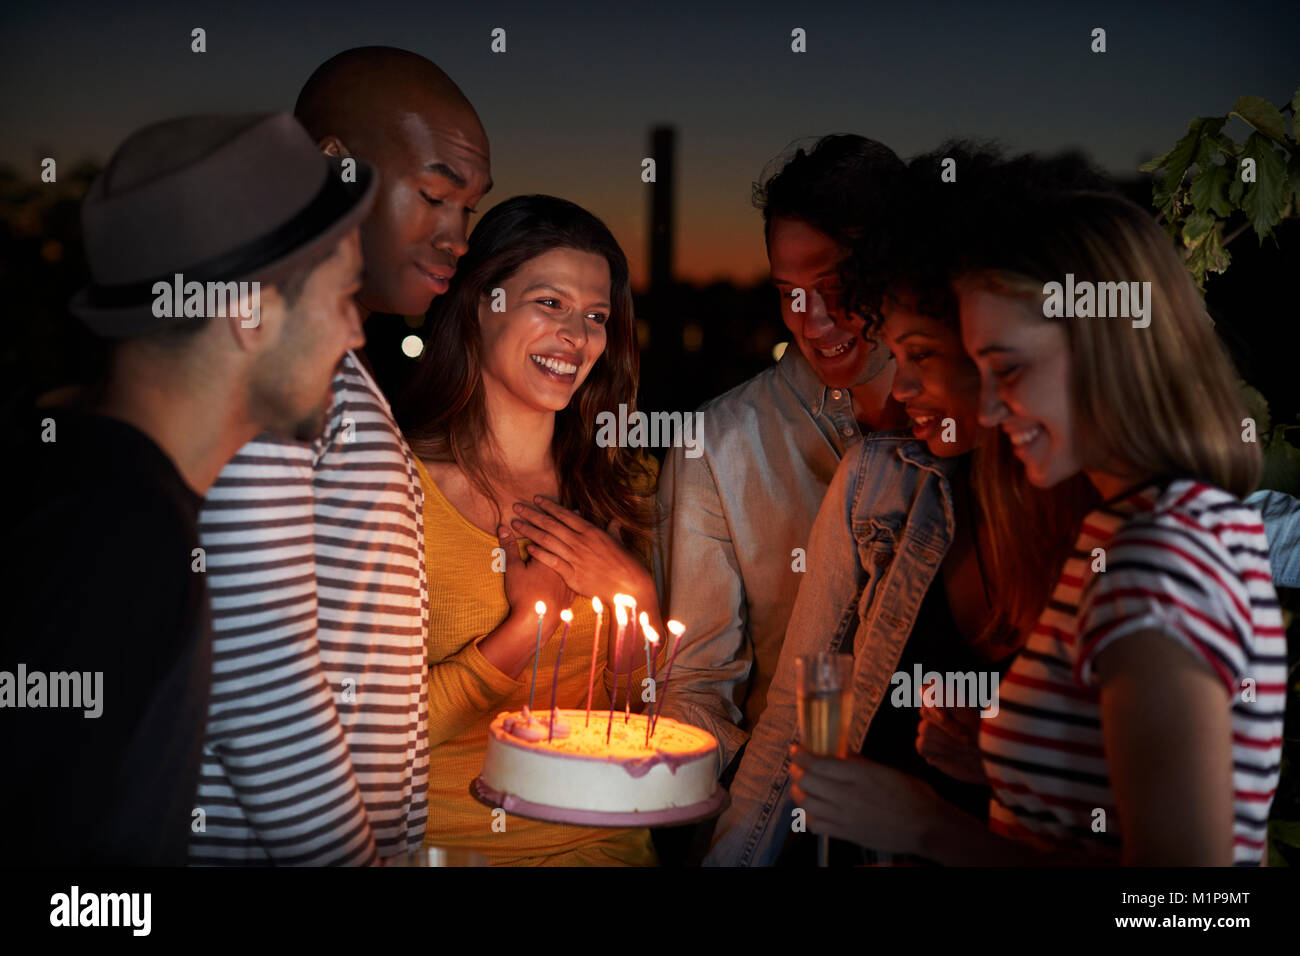 Young adults celebrating with a birthday cake on a rooftop Stock Photo